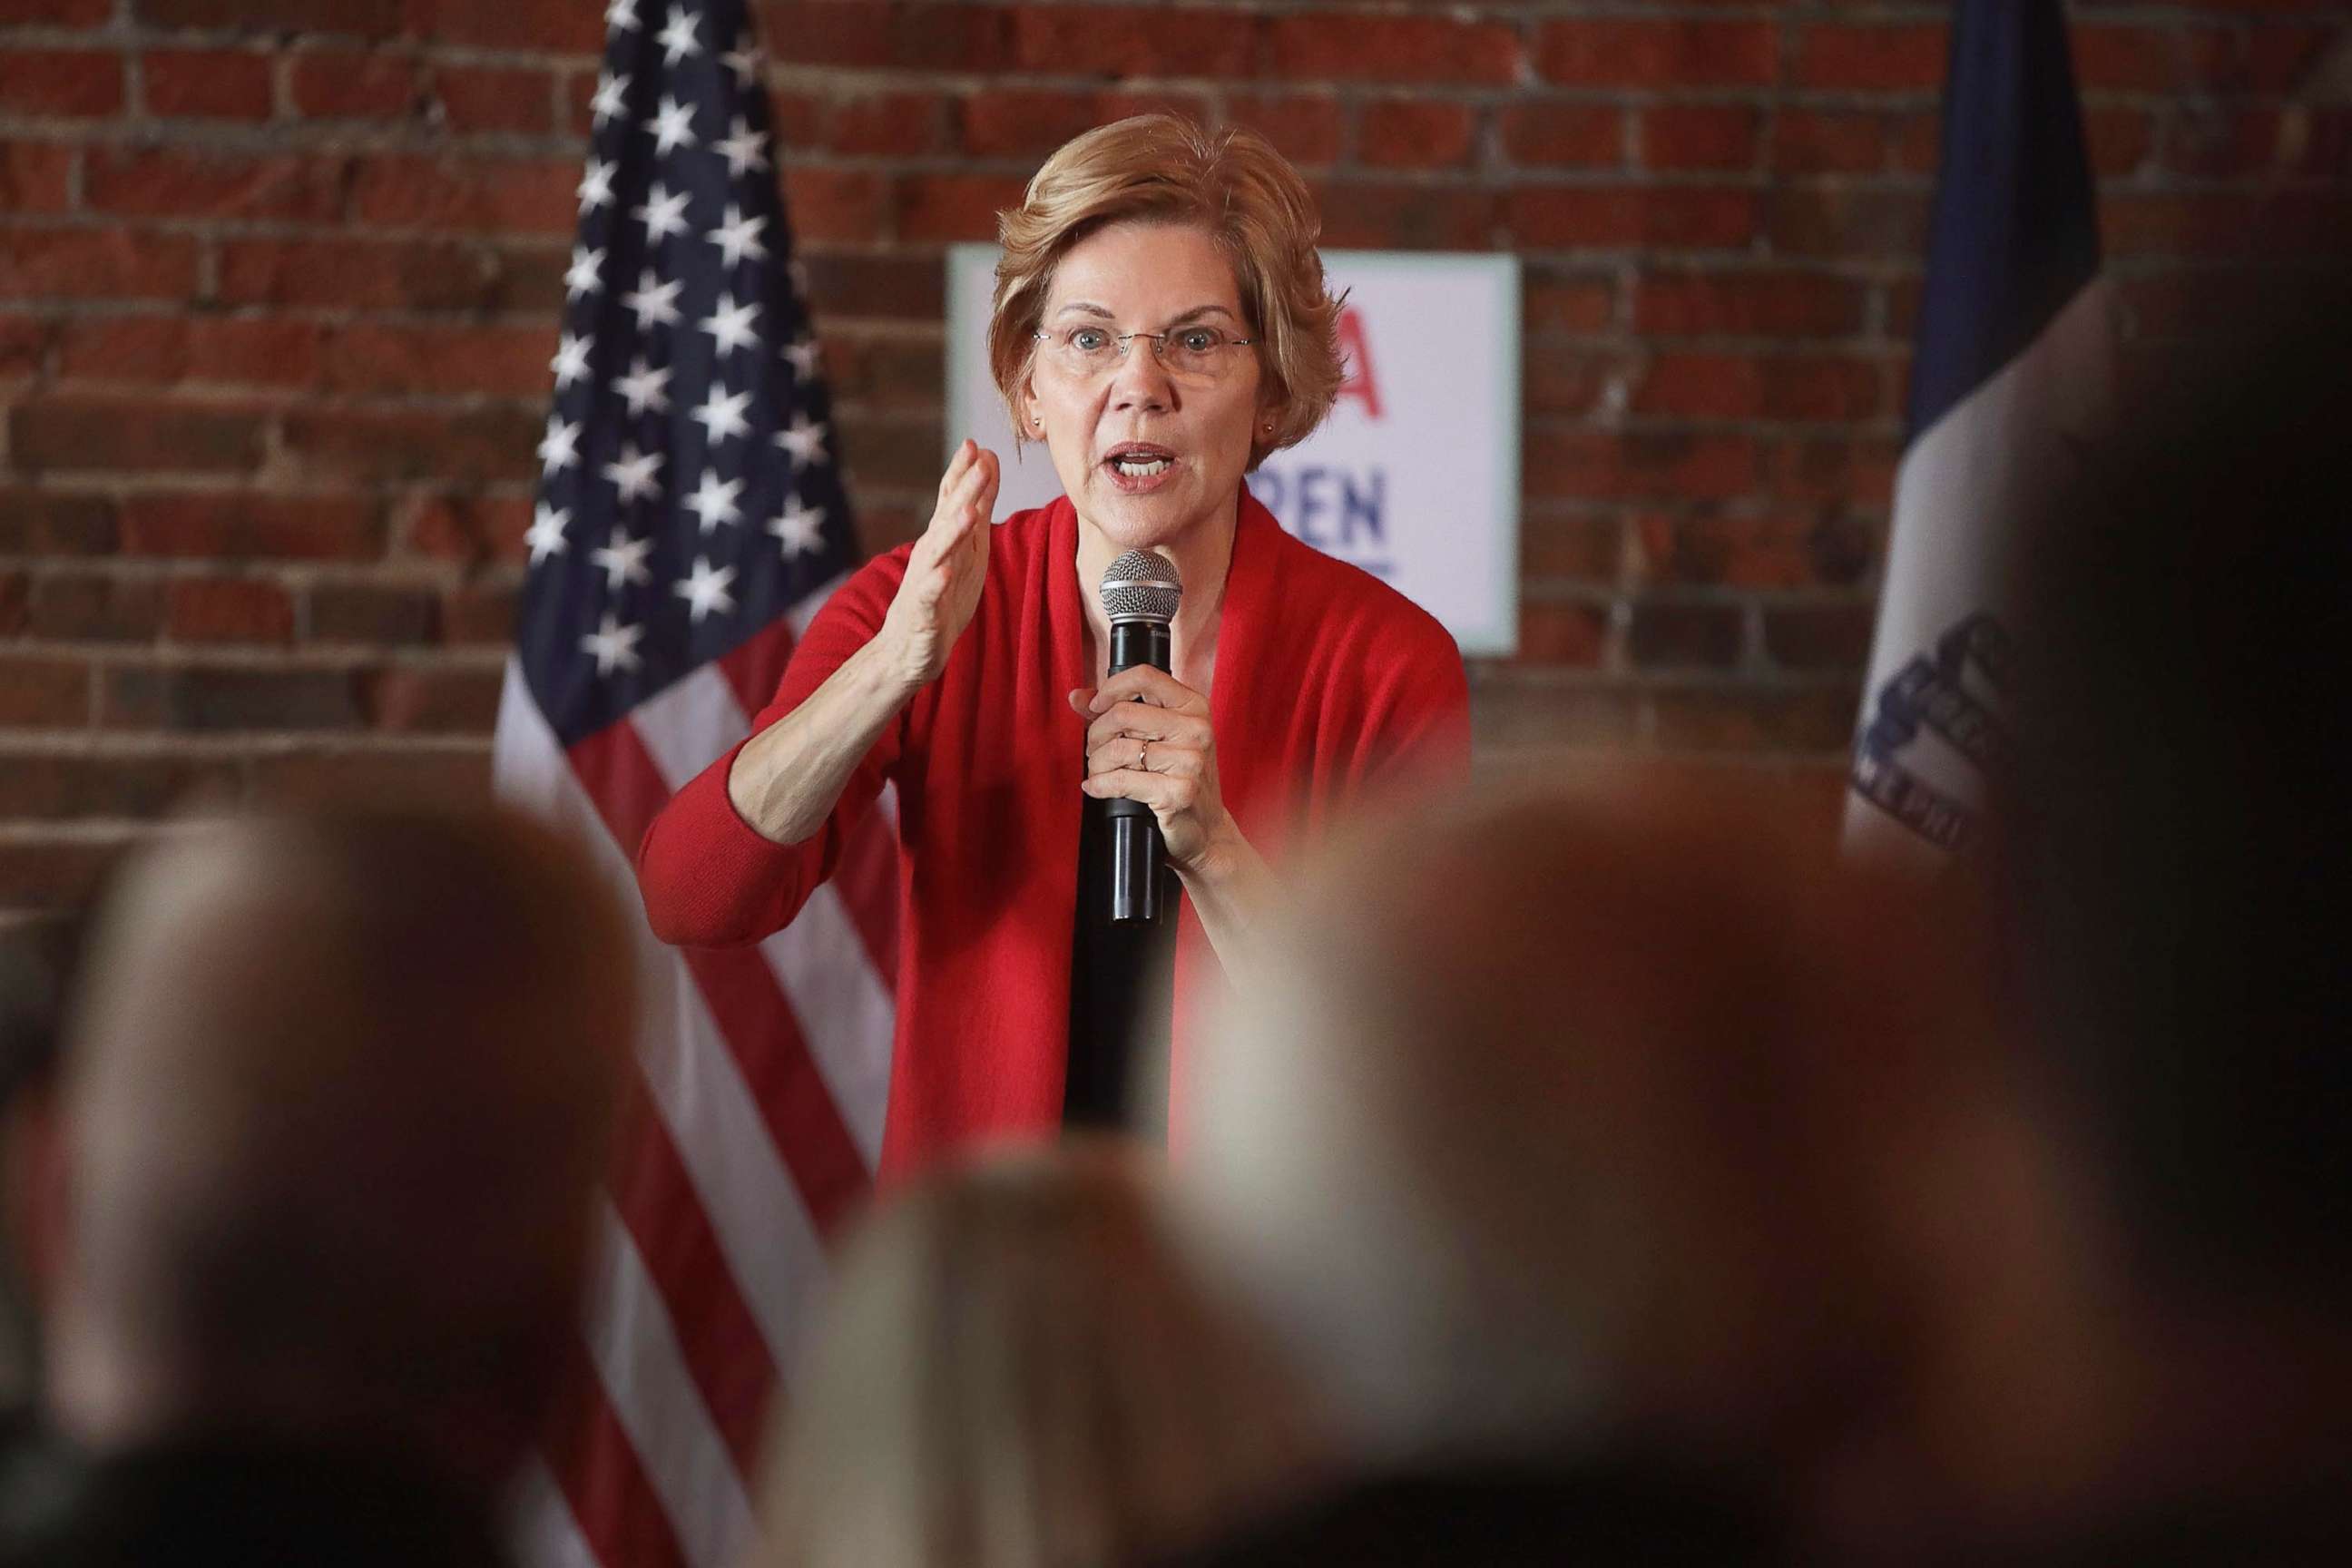 PHOTO: Sen. Elizabeth Warren speaks at a campaign rally at the Stone Cliff Winery on March 1, 2019, in Dubuque, Iowa.